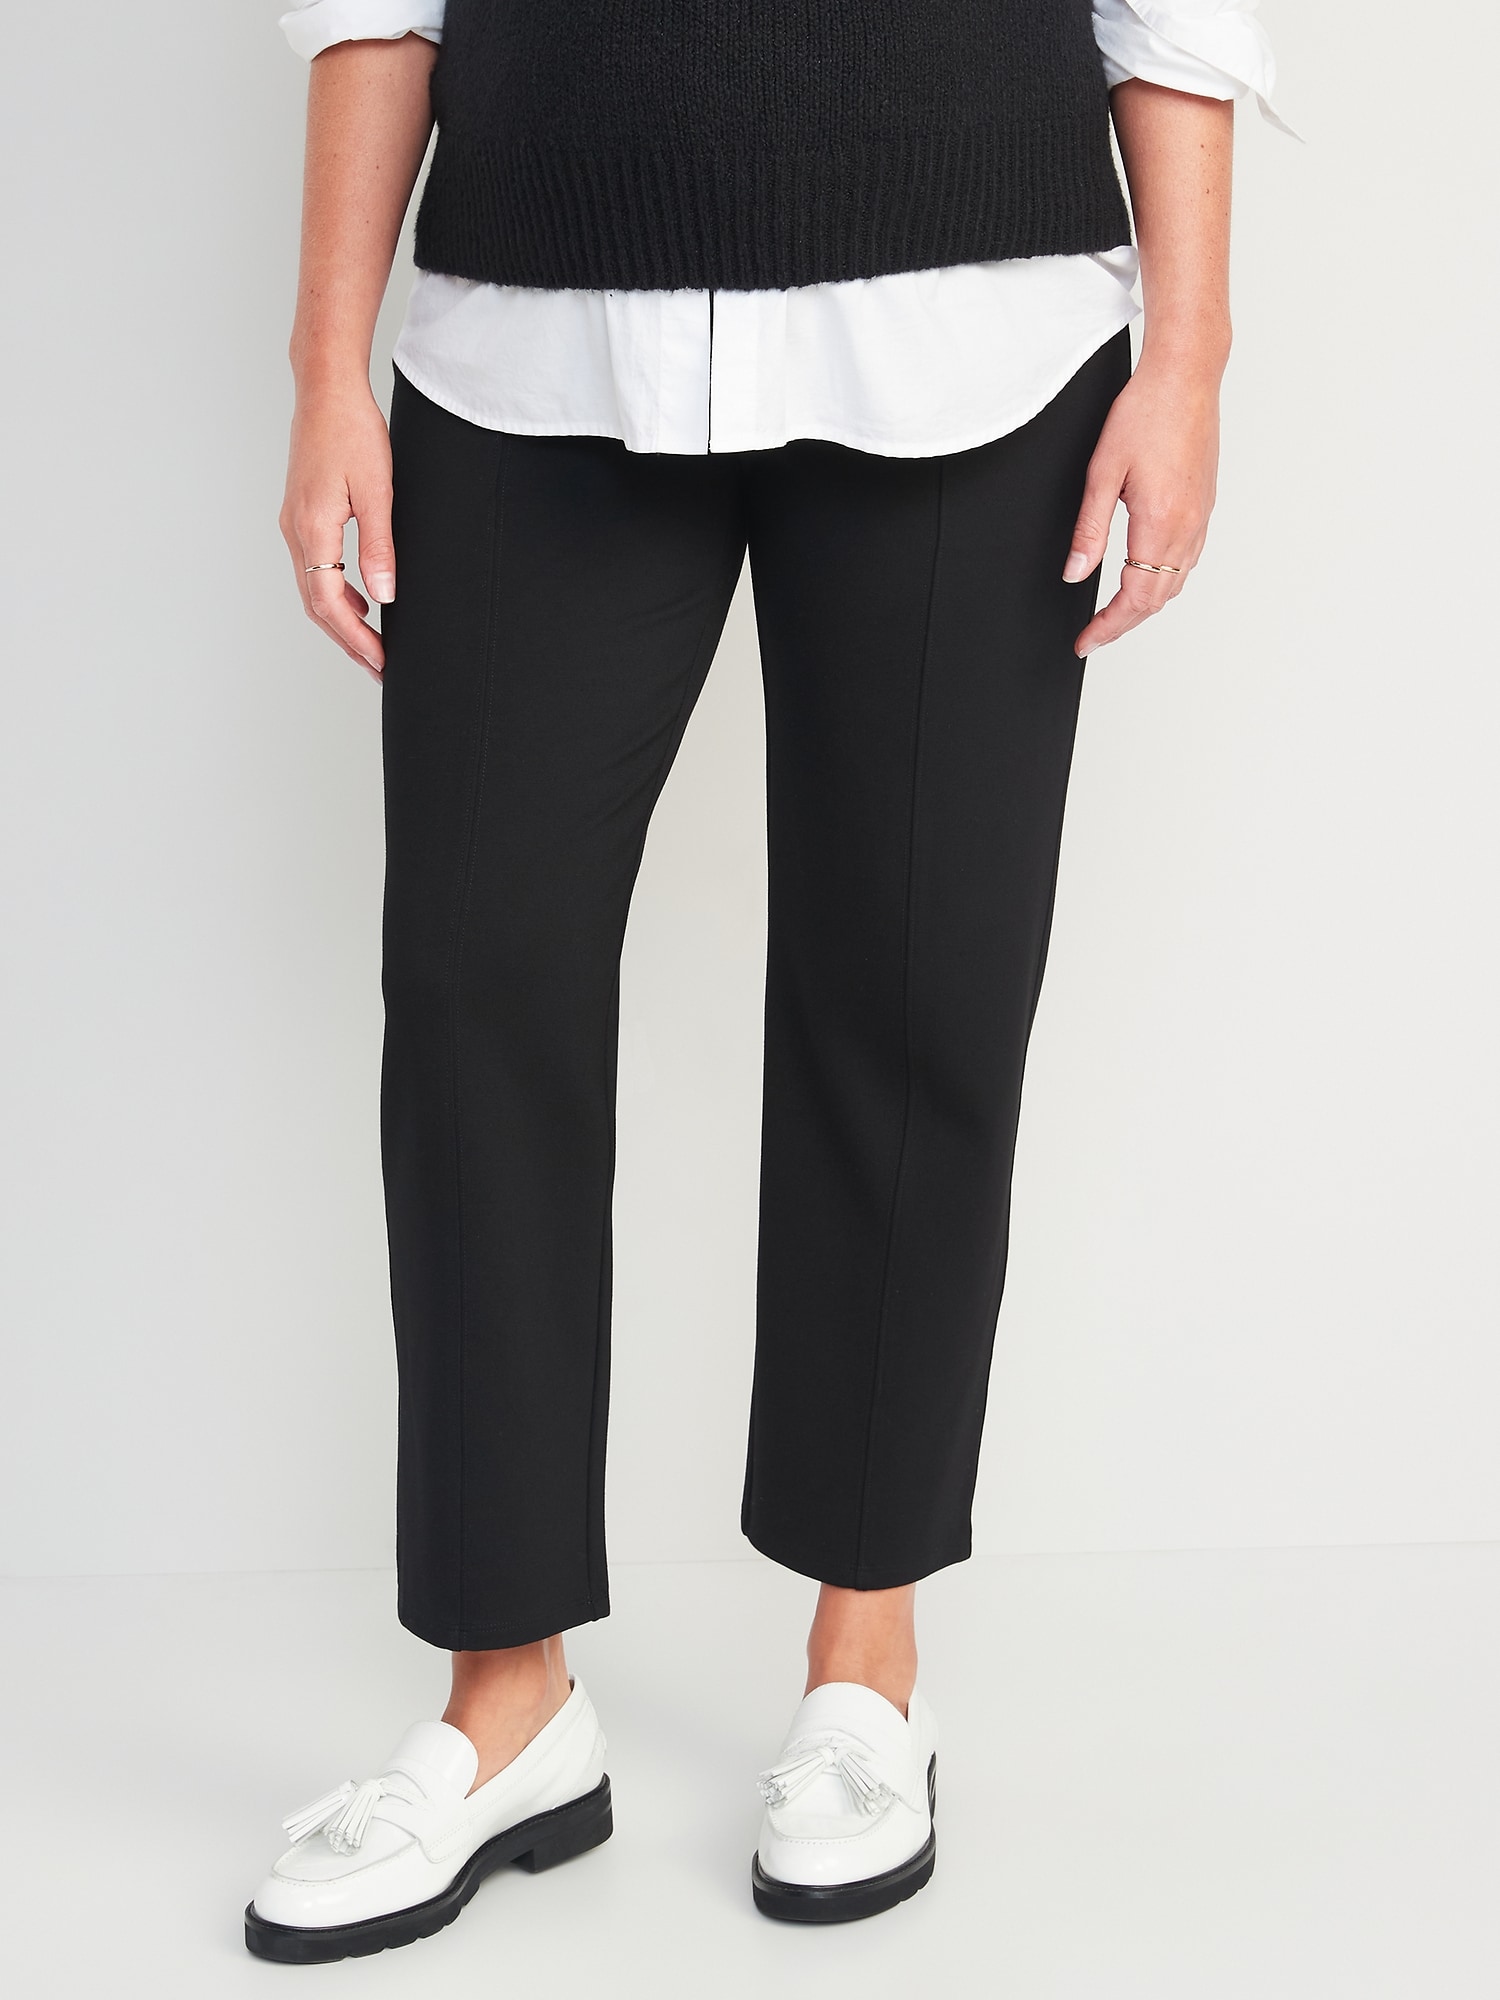 Maternity Times Two Overbelly Capri Poplin Pants - Available in